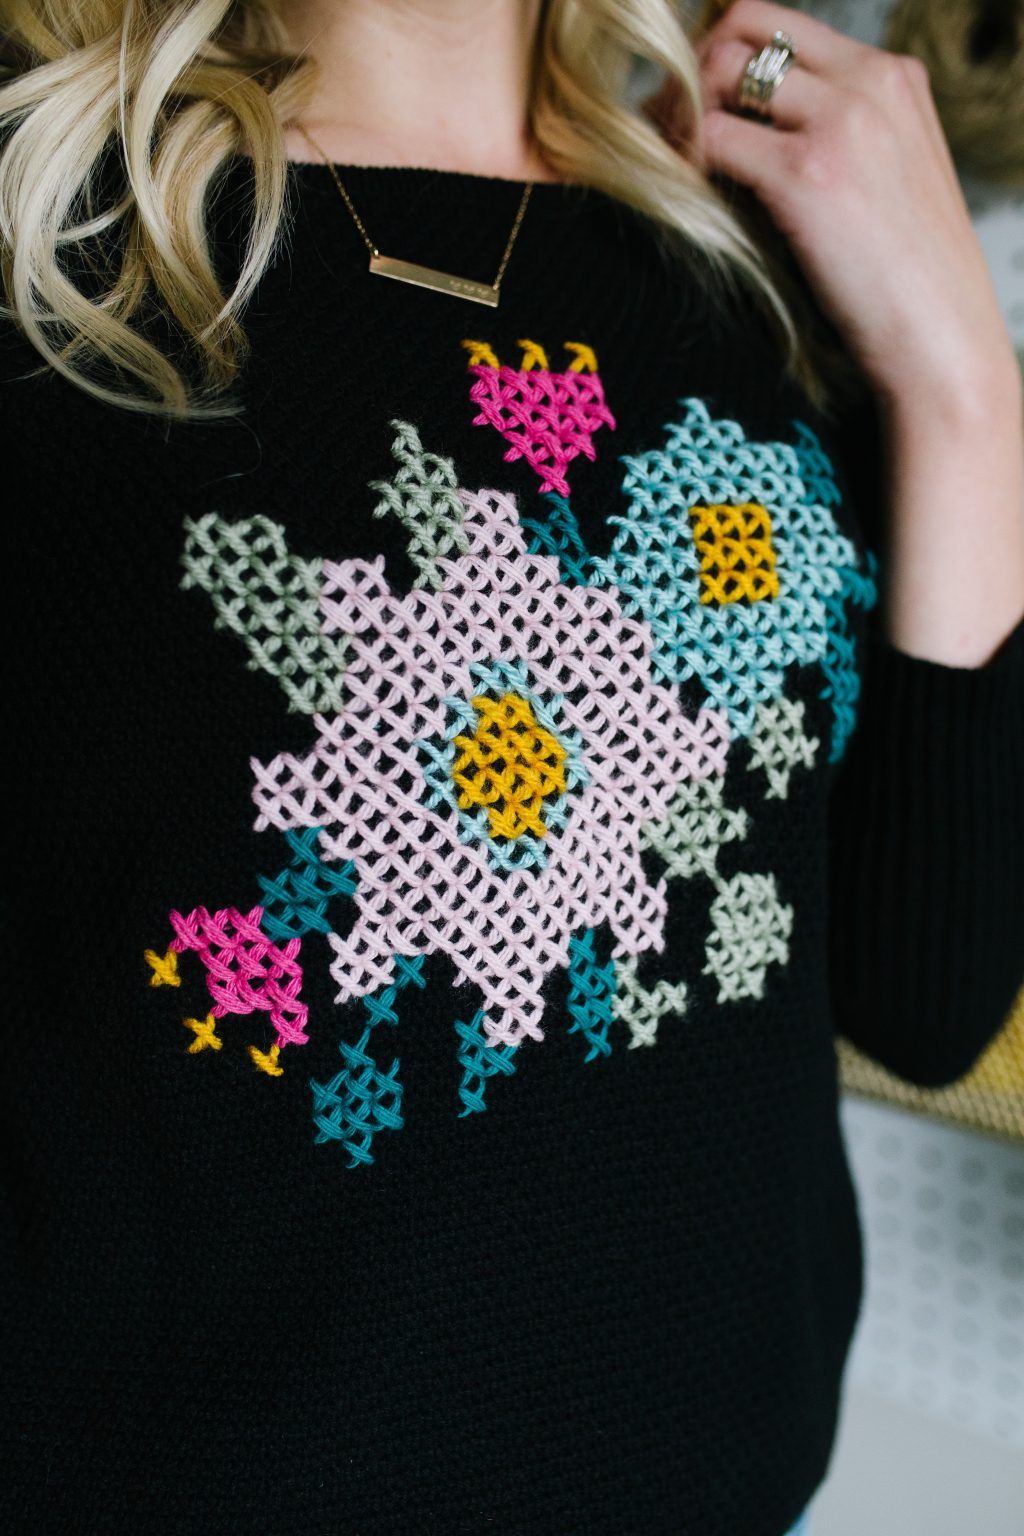 Create Your Own Embellished Sweater with These Easy DIY Tips